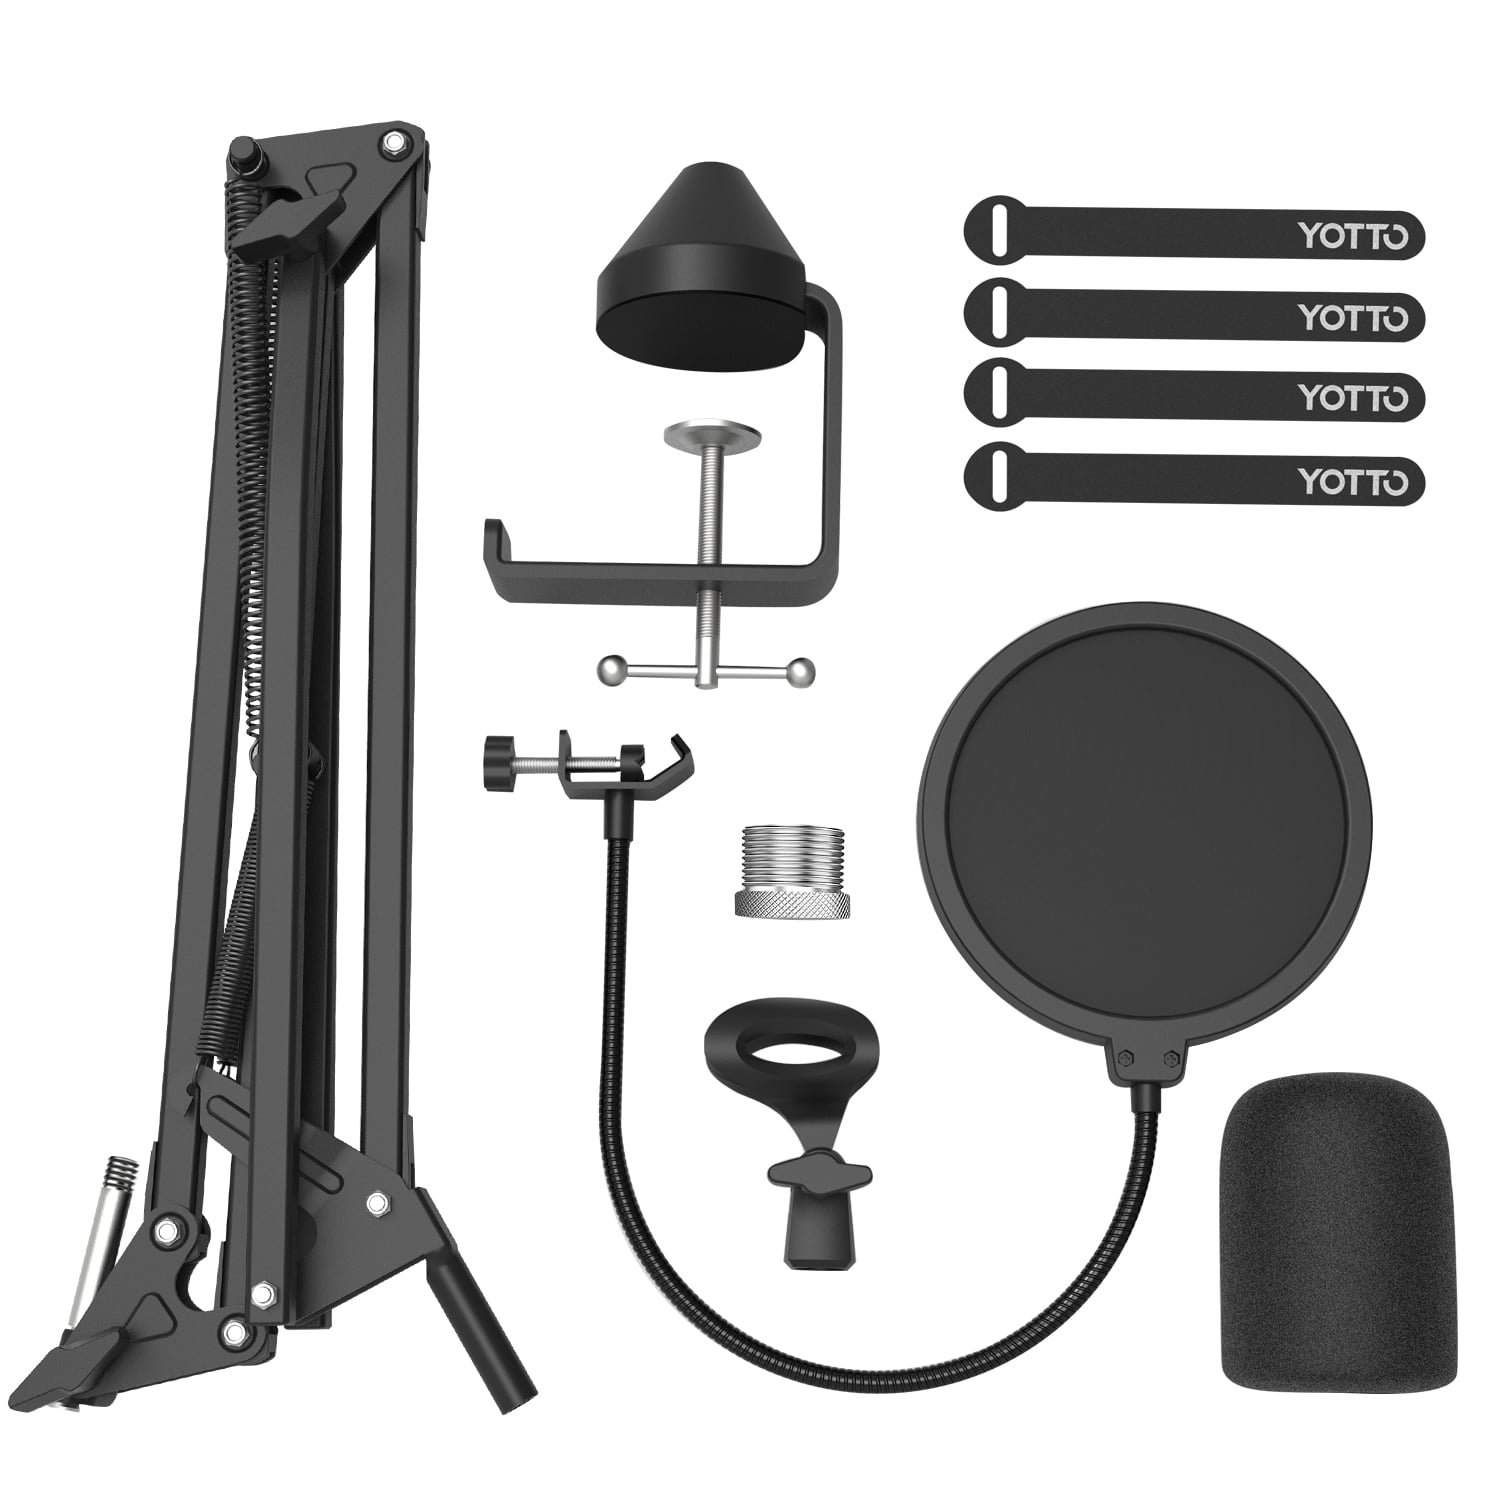 YOTTO USB Microphone Cardioid Condenser Mic 192KHz/24bit Plug and Play  Professional Studio Podcast Microphone with Adjustable Microphone Stand  Suspension Scissor Boom Arm, Pop Filter, Shock Mount 